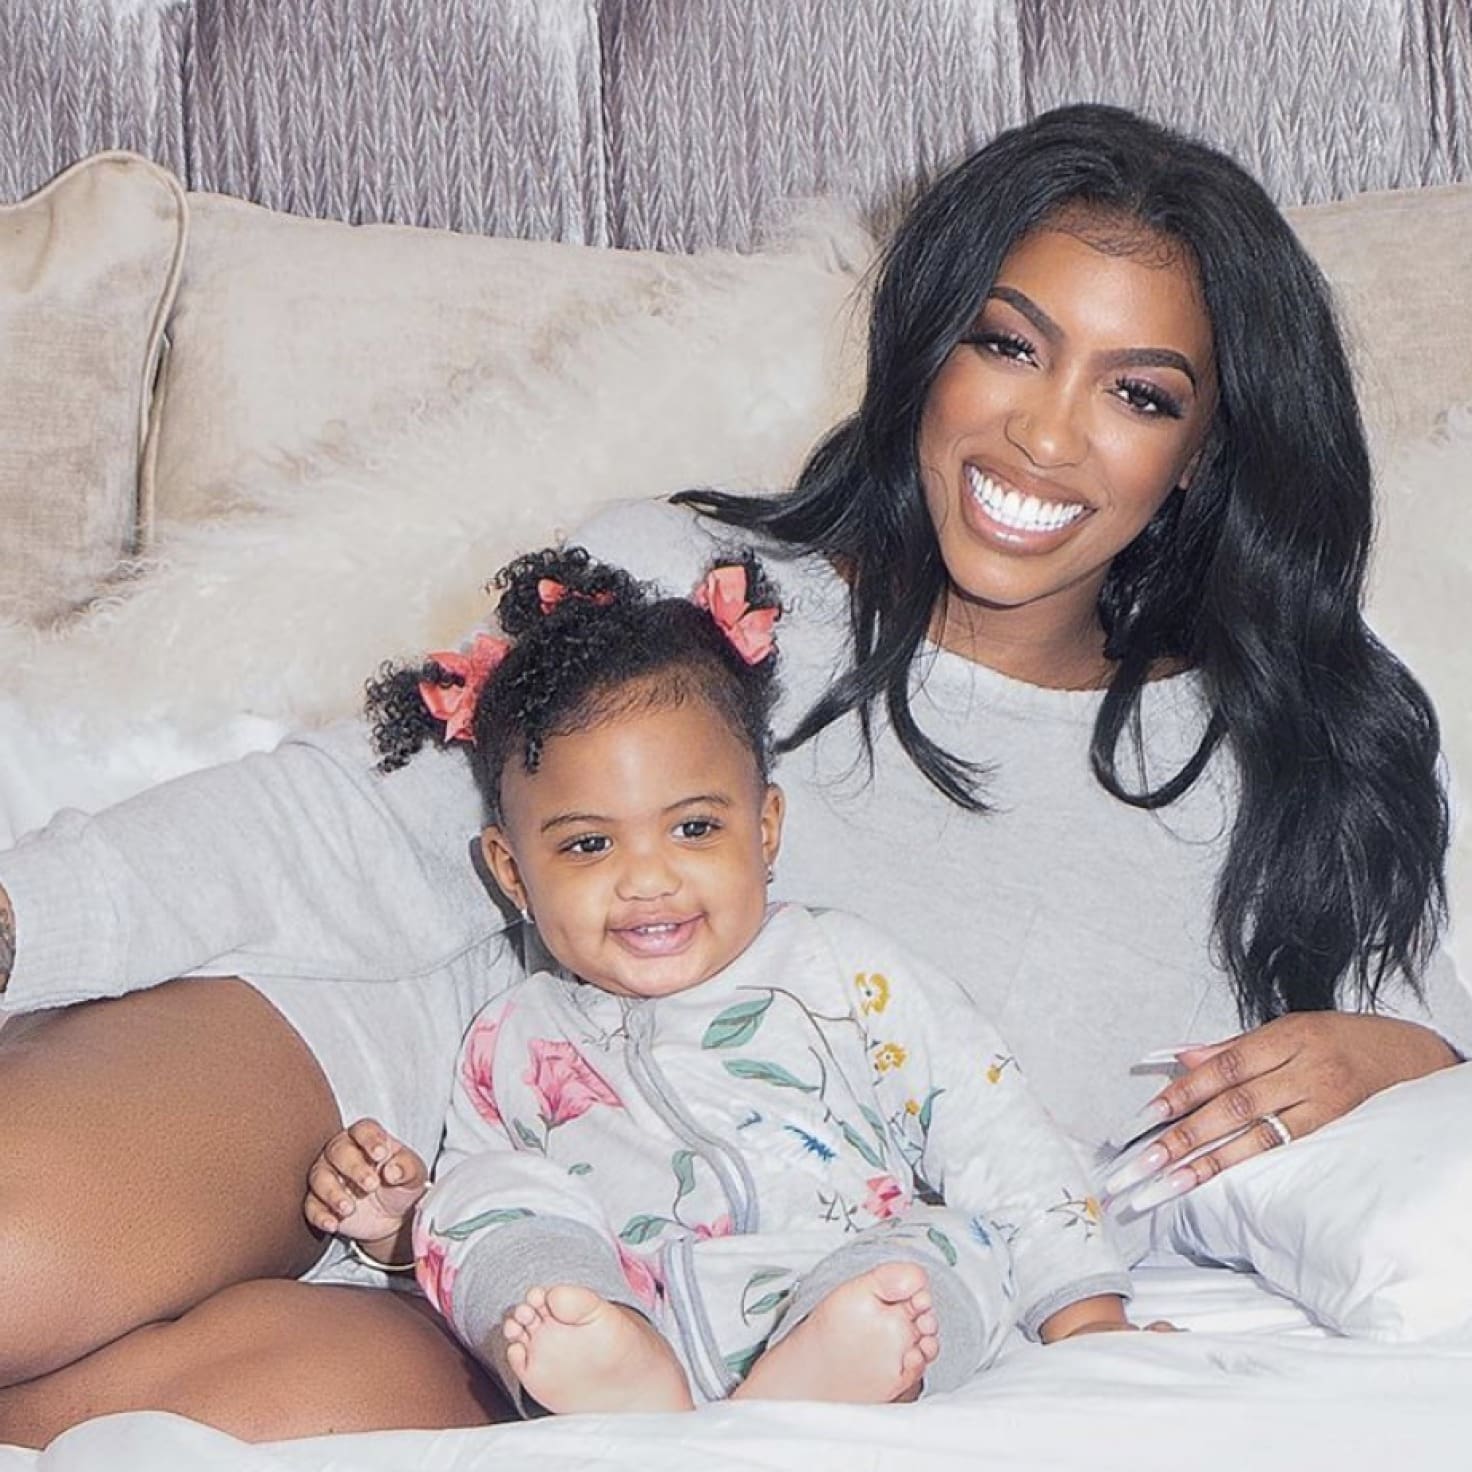 Porsha Williams Says She Had The Same Tastes As Breonna Taylor And Promises Her Justice